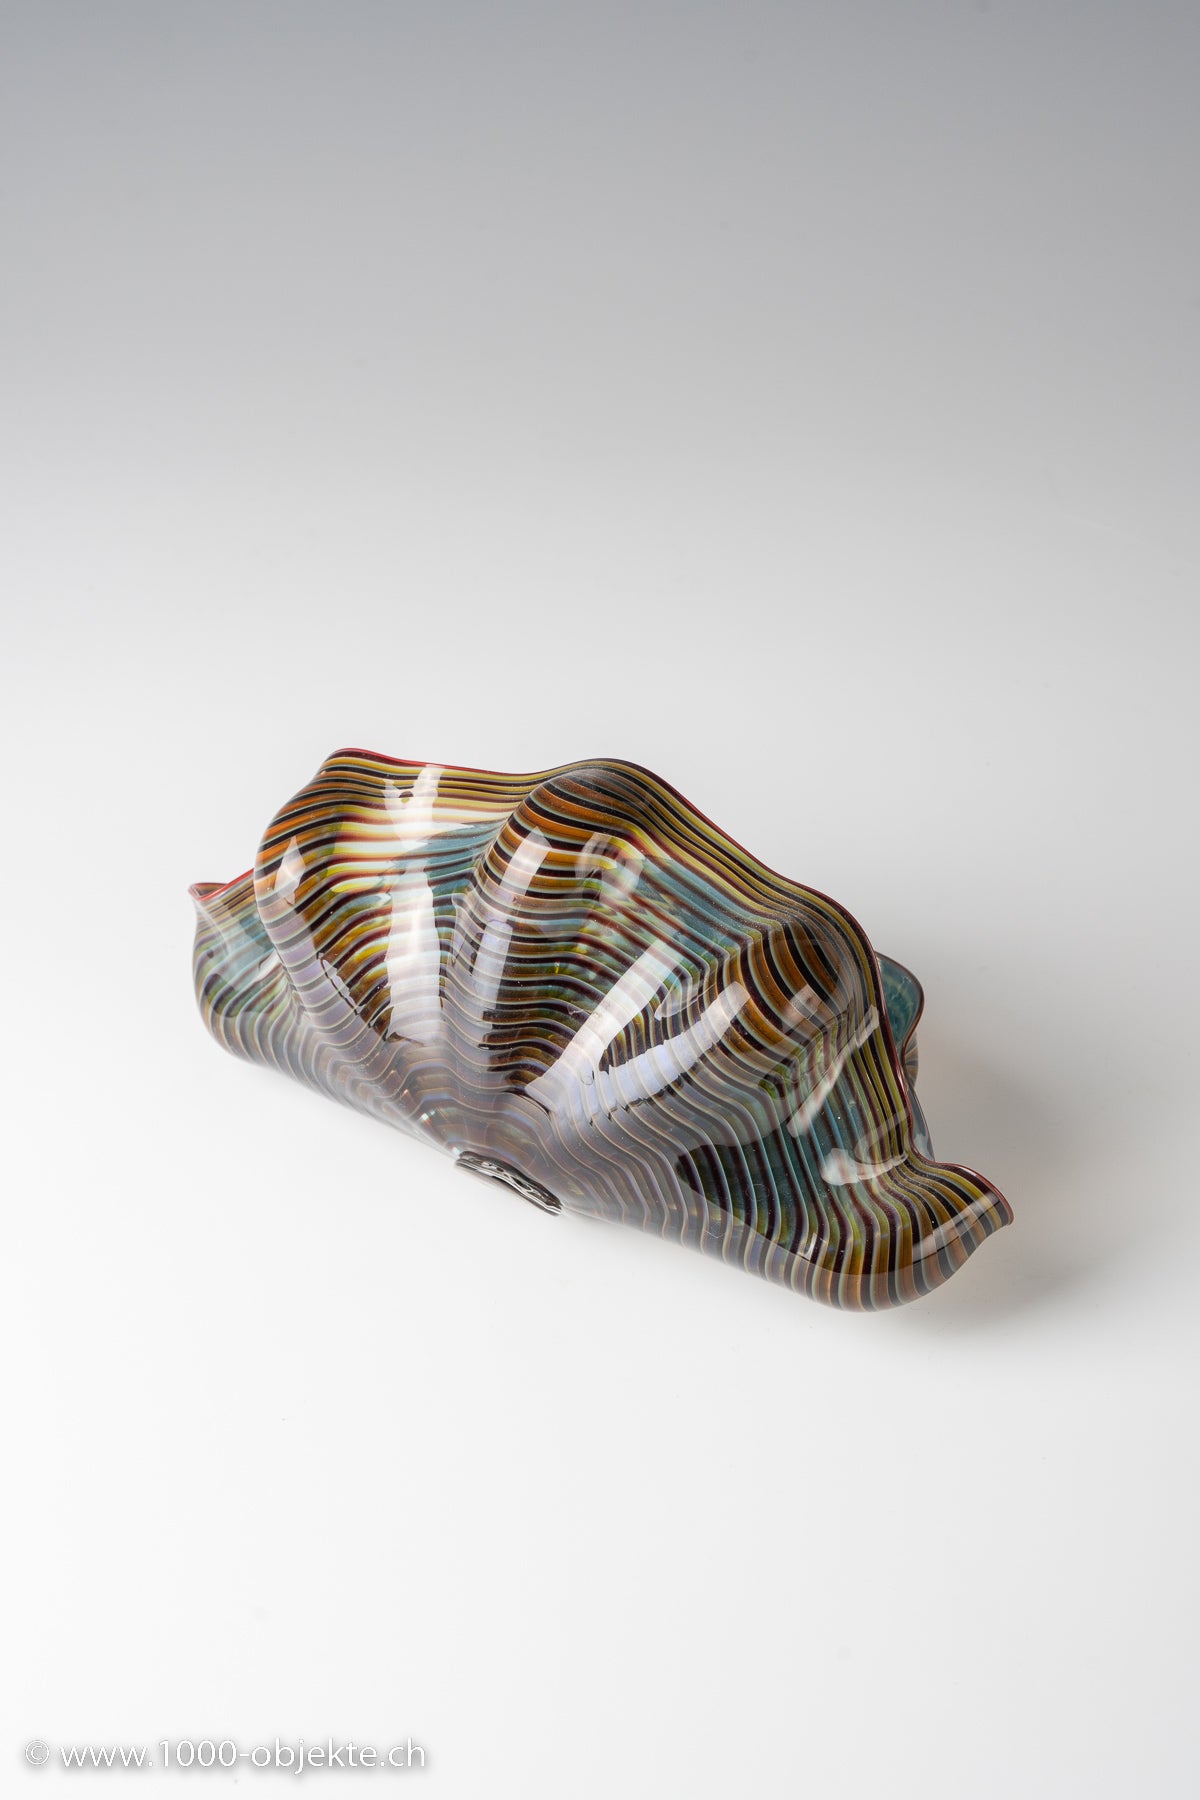 Dale Chihuly, glass sculpture 'Persian', 1990